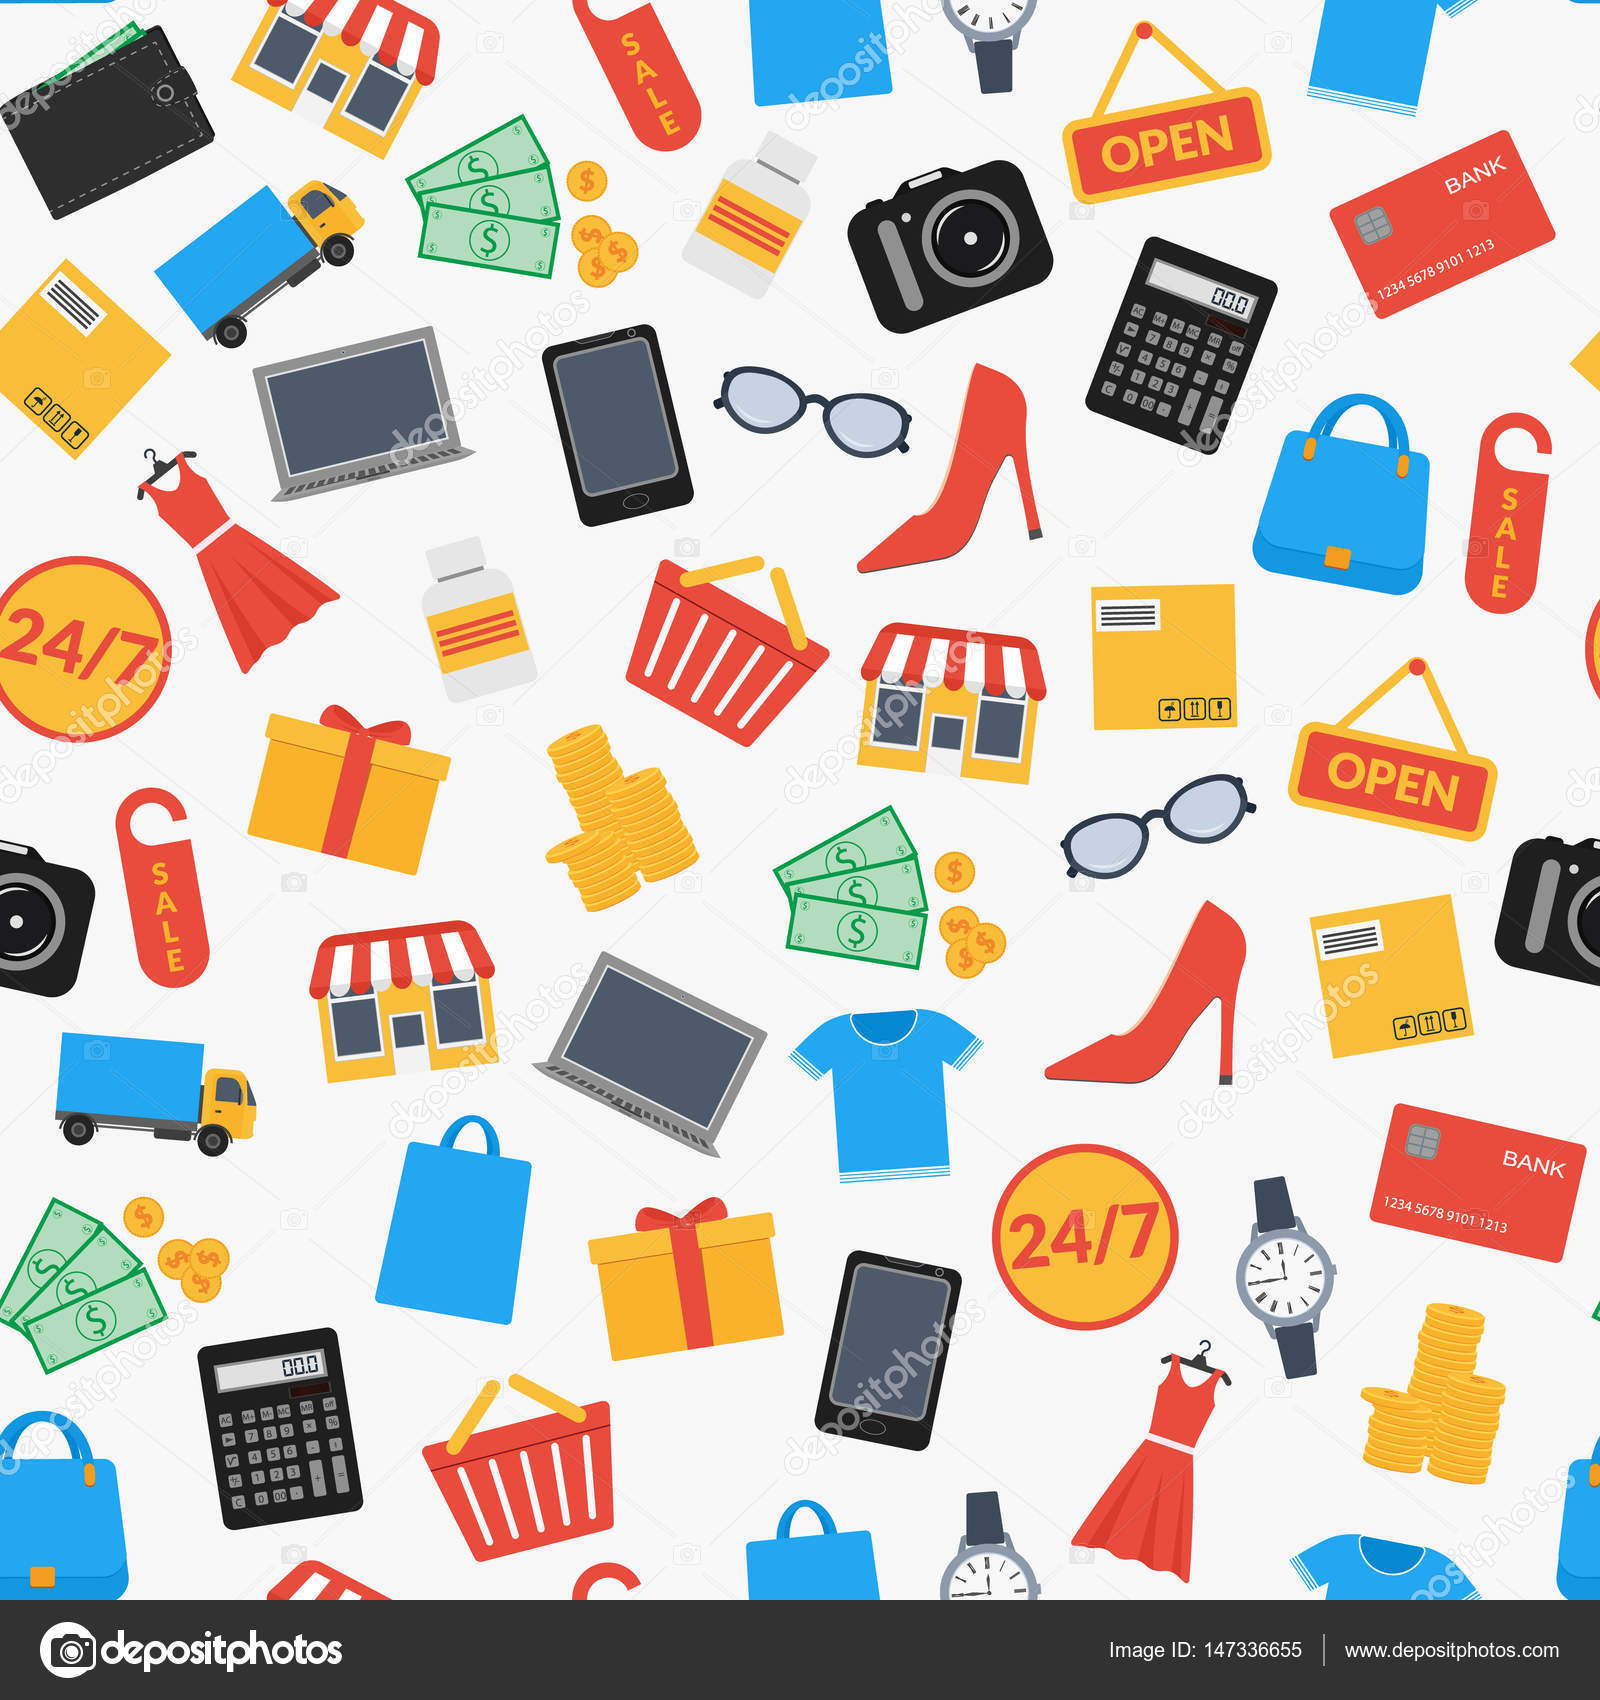 Enjoy Shopping Online By Making Use Of These Guidelines 1